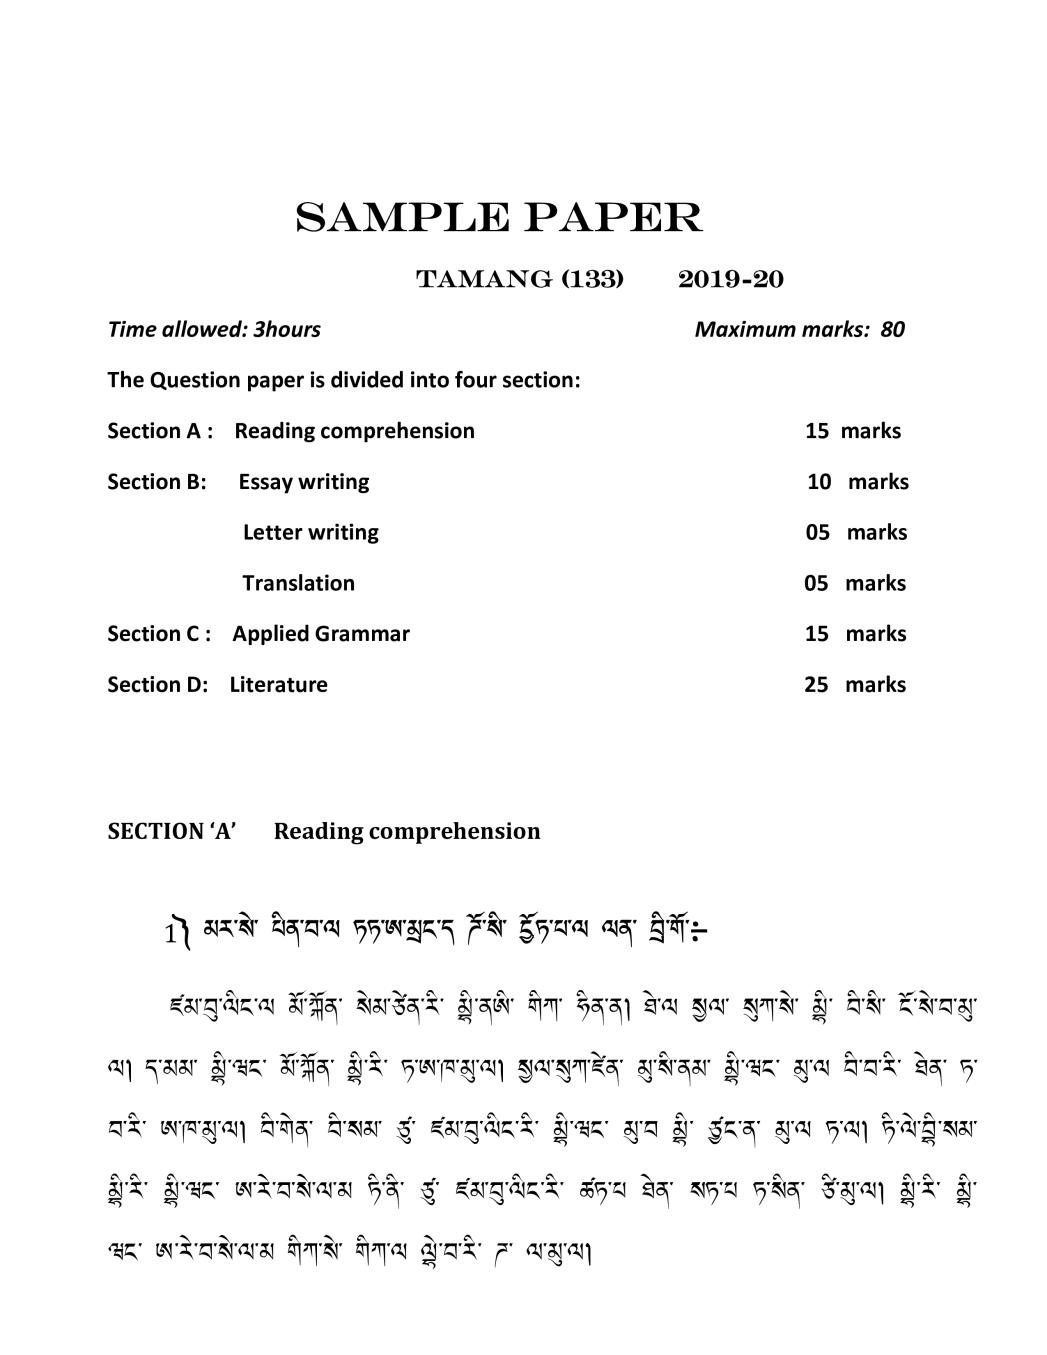 CBSE Class 10 Sample Paper with Marking Scheme 2020 for Tamang - Page 1